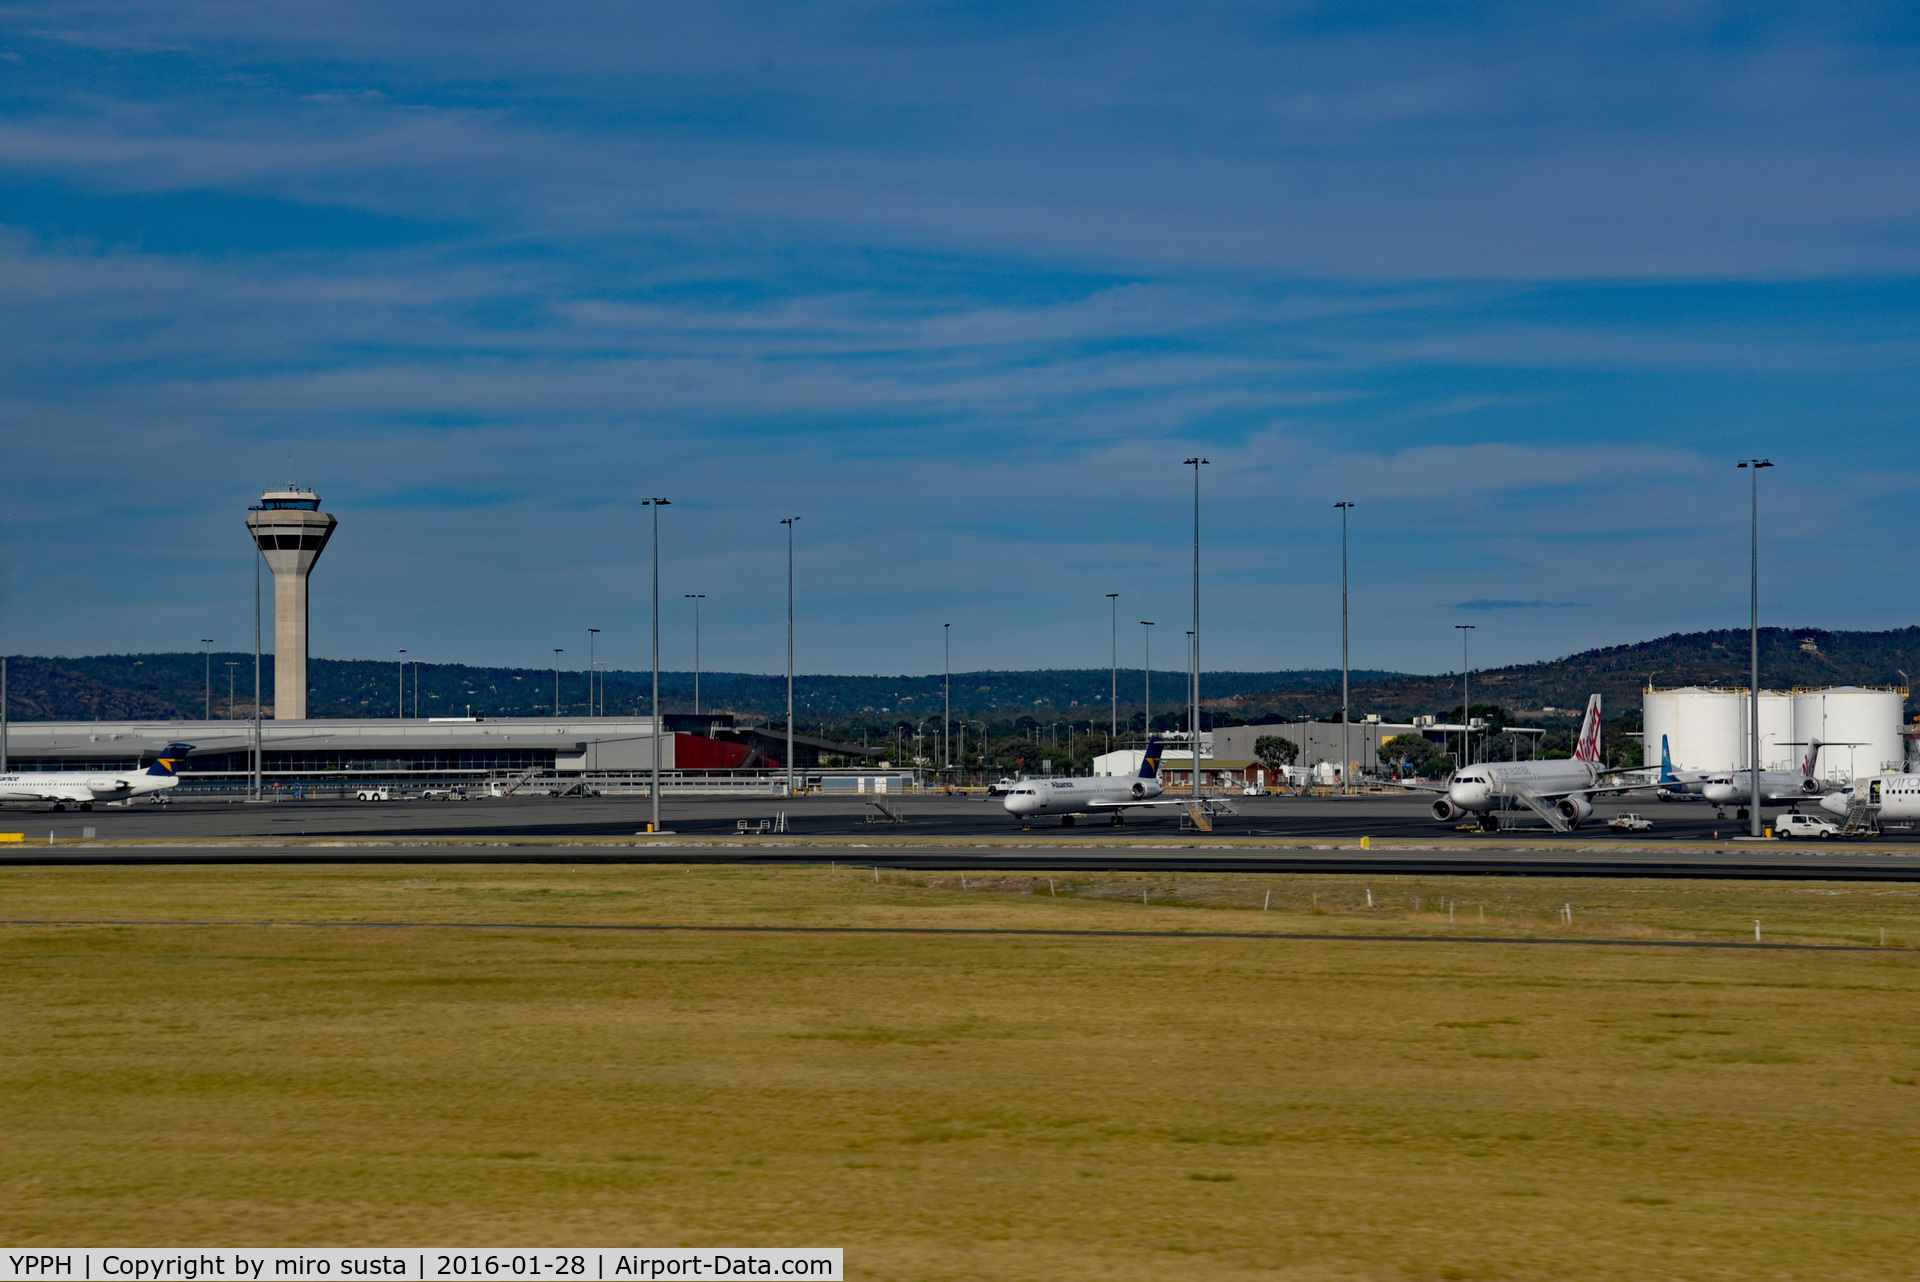 Perth International Airport, Redcliffe, Western Australia Australia (YPPH) - Perth (WA) International Airport